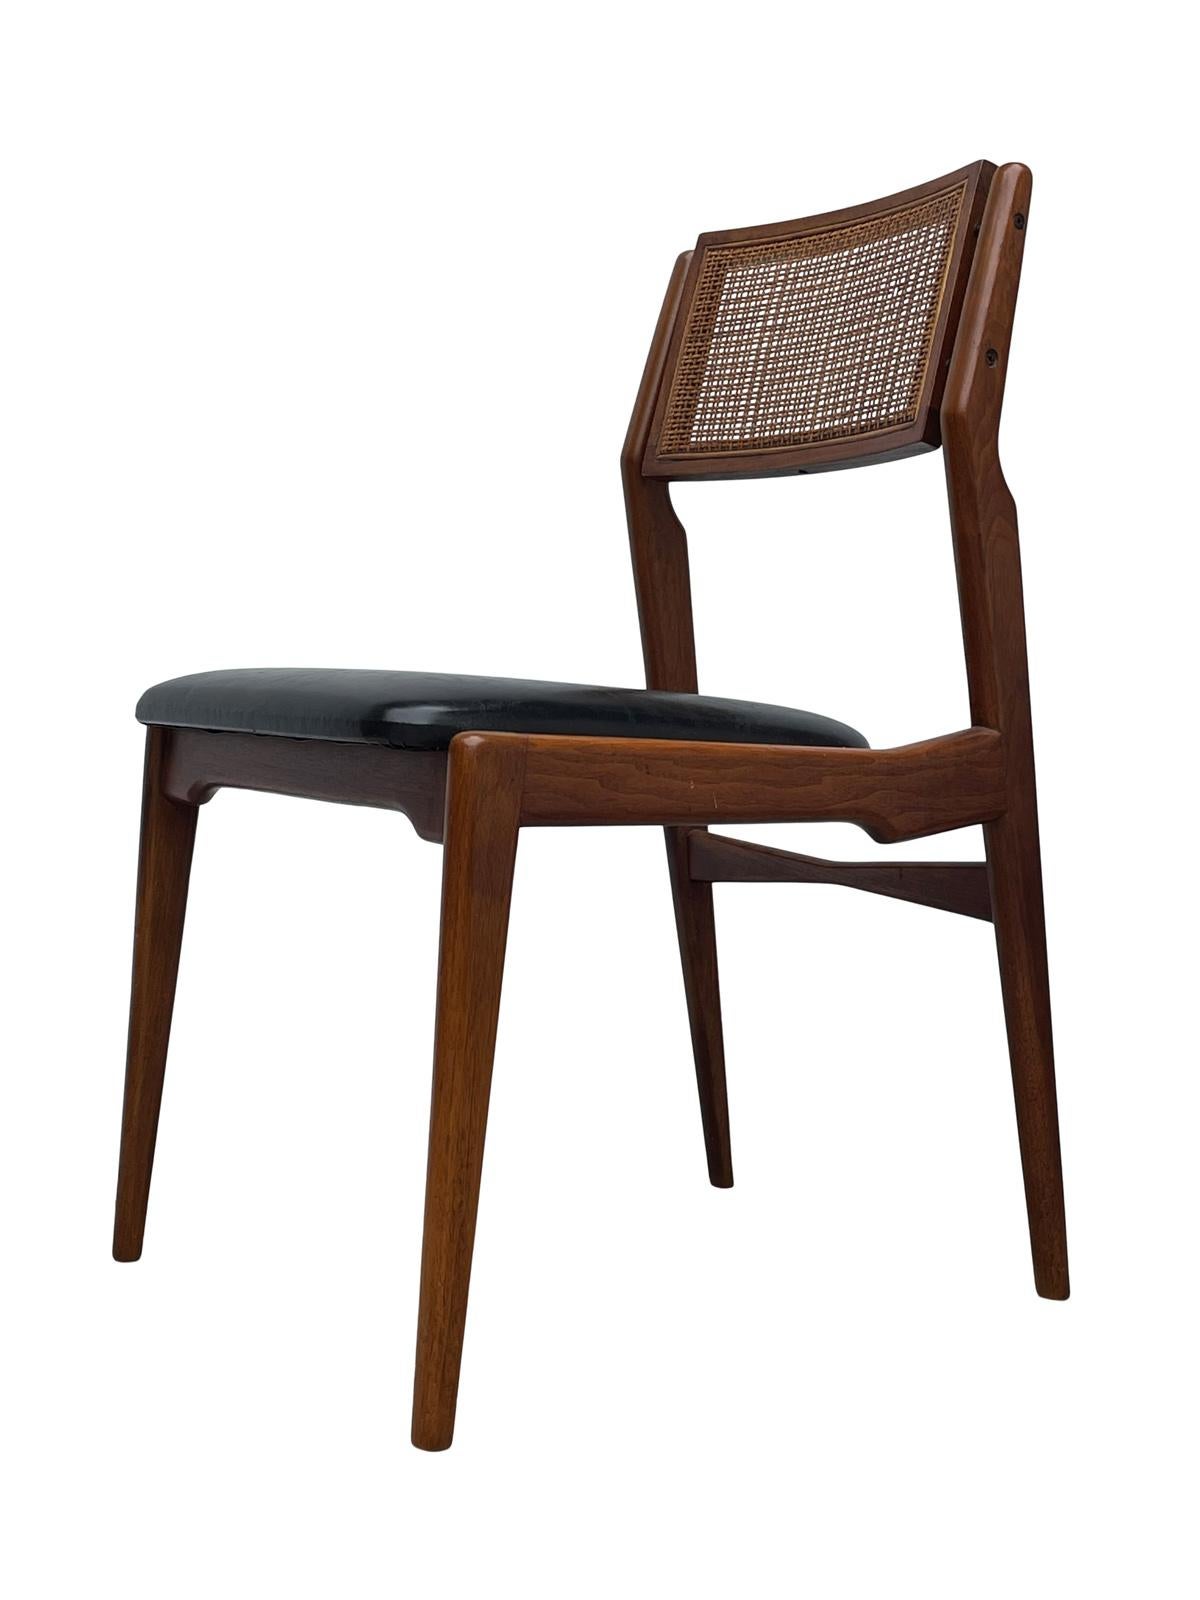 American Mid Century Modern Caned Walnut Dining Chairs For Sale